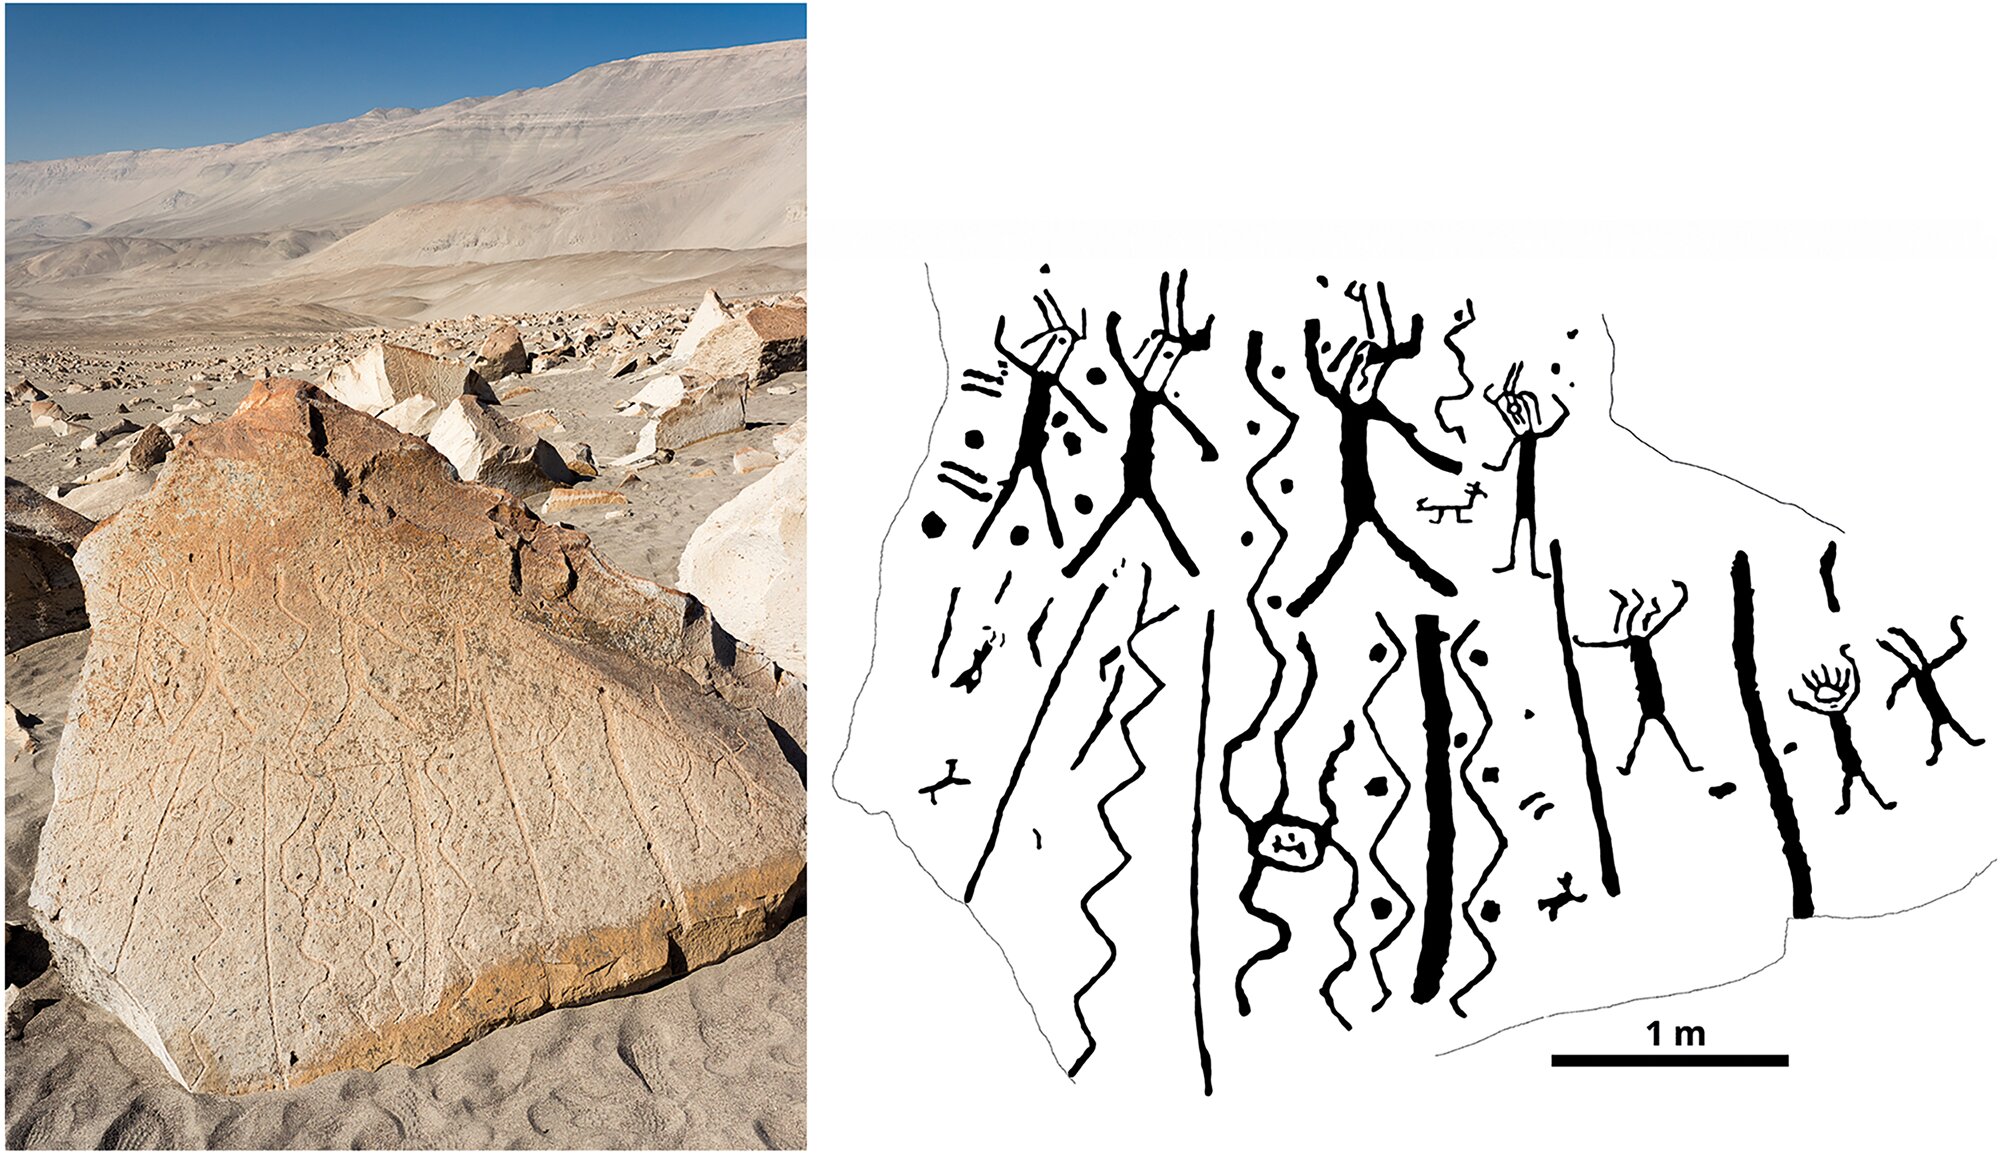 Archaeologists Reveal Rock Art May Depict People Singing While High